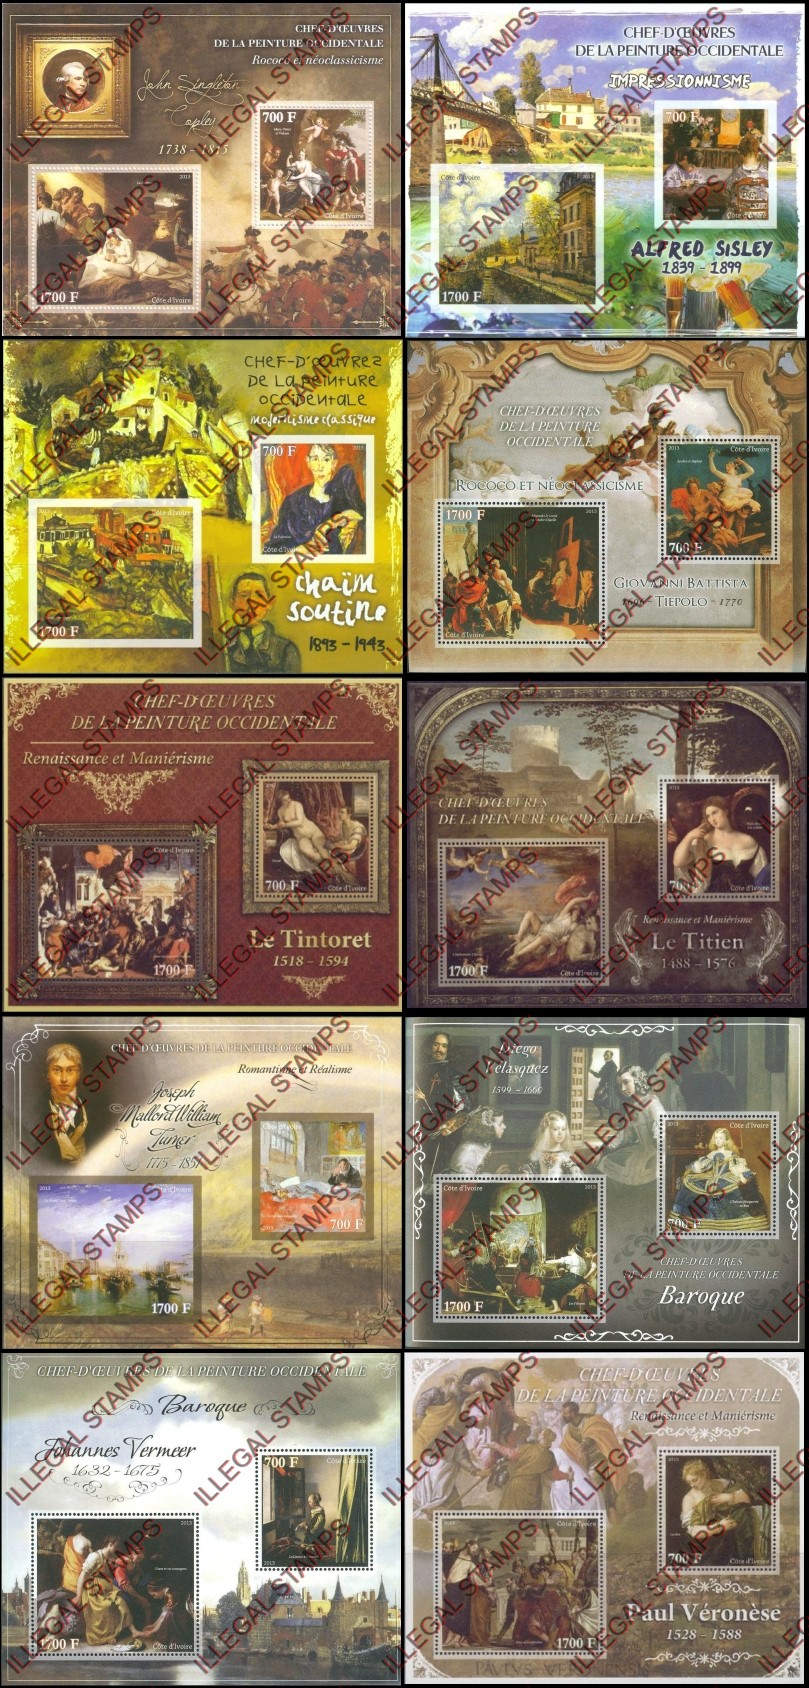 Ivory Coast 2013 Art Impressionism Paintings Illegal Stamp Souvenir Sheets of 2 (part 7)